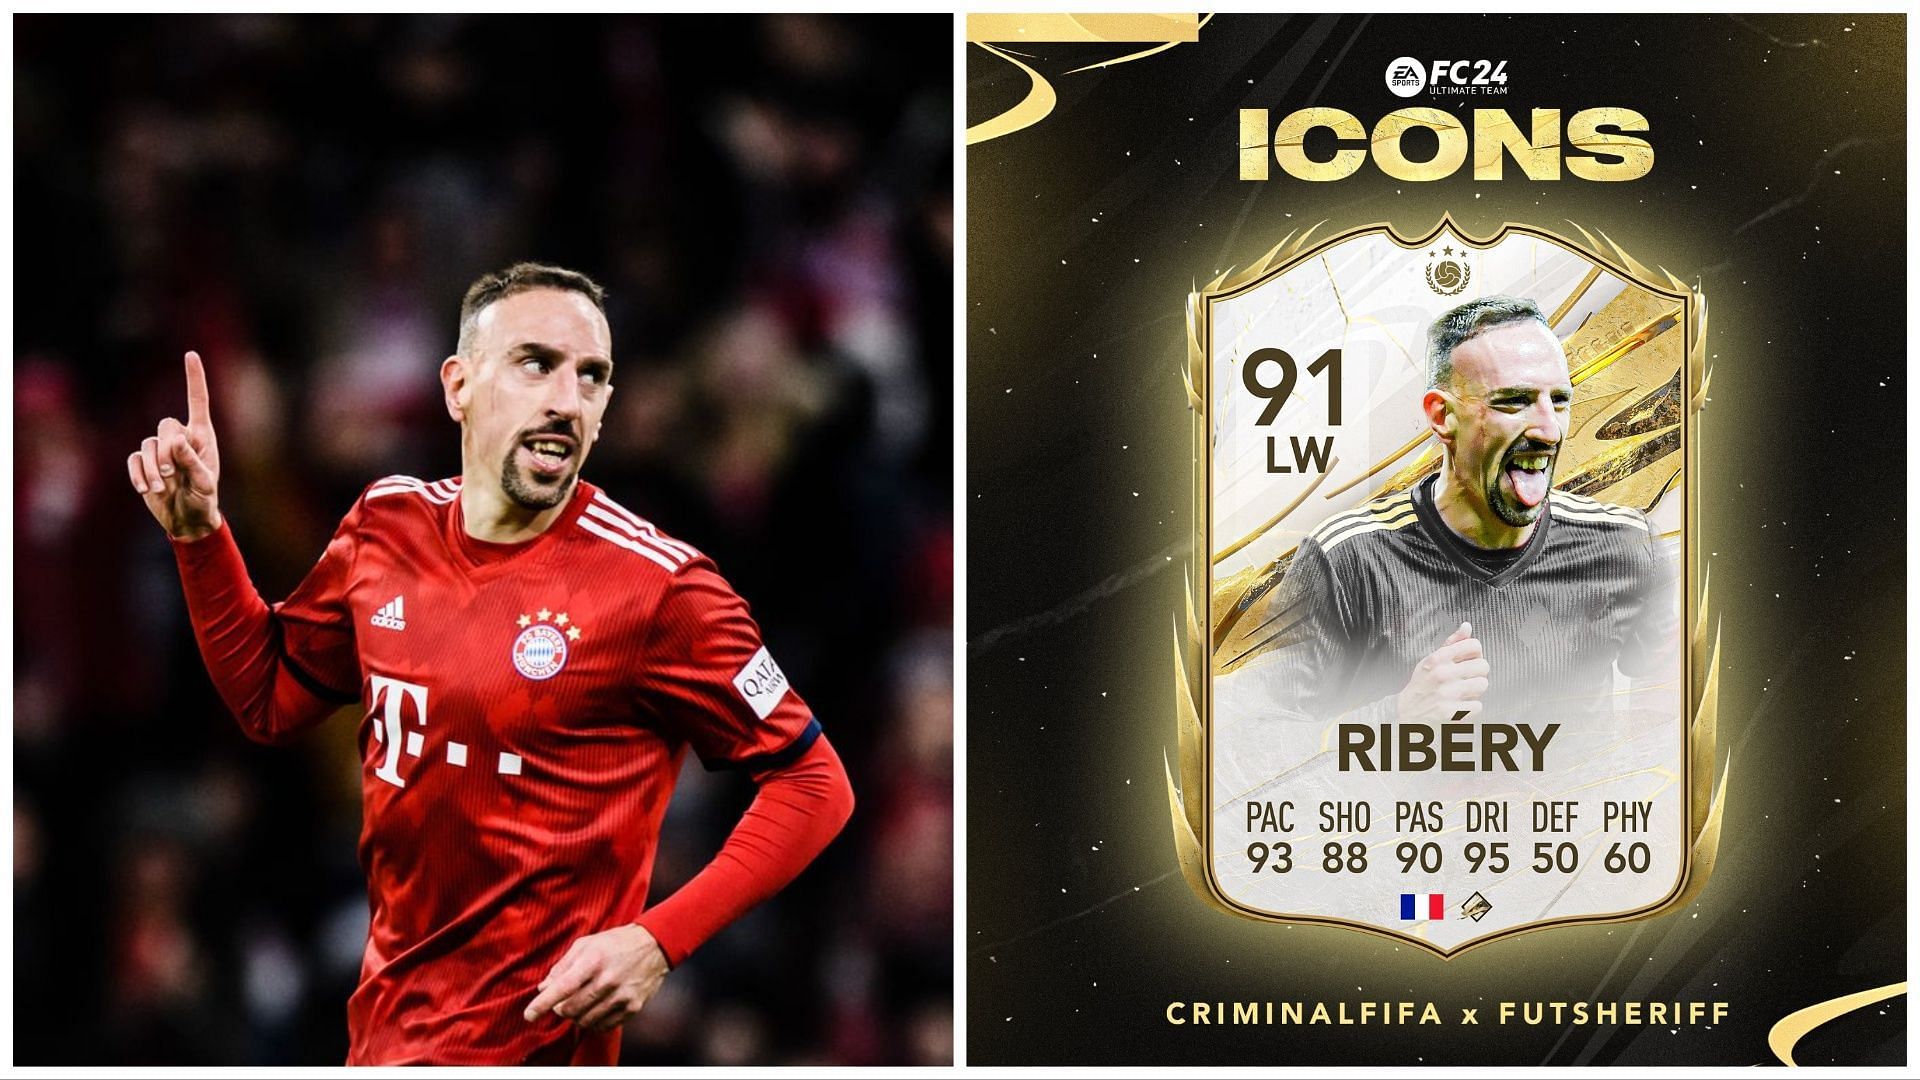 Icon Ribery has been leaked for FC 24 (Images via Getty and Twitter/FUT Sheriff)